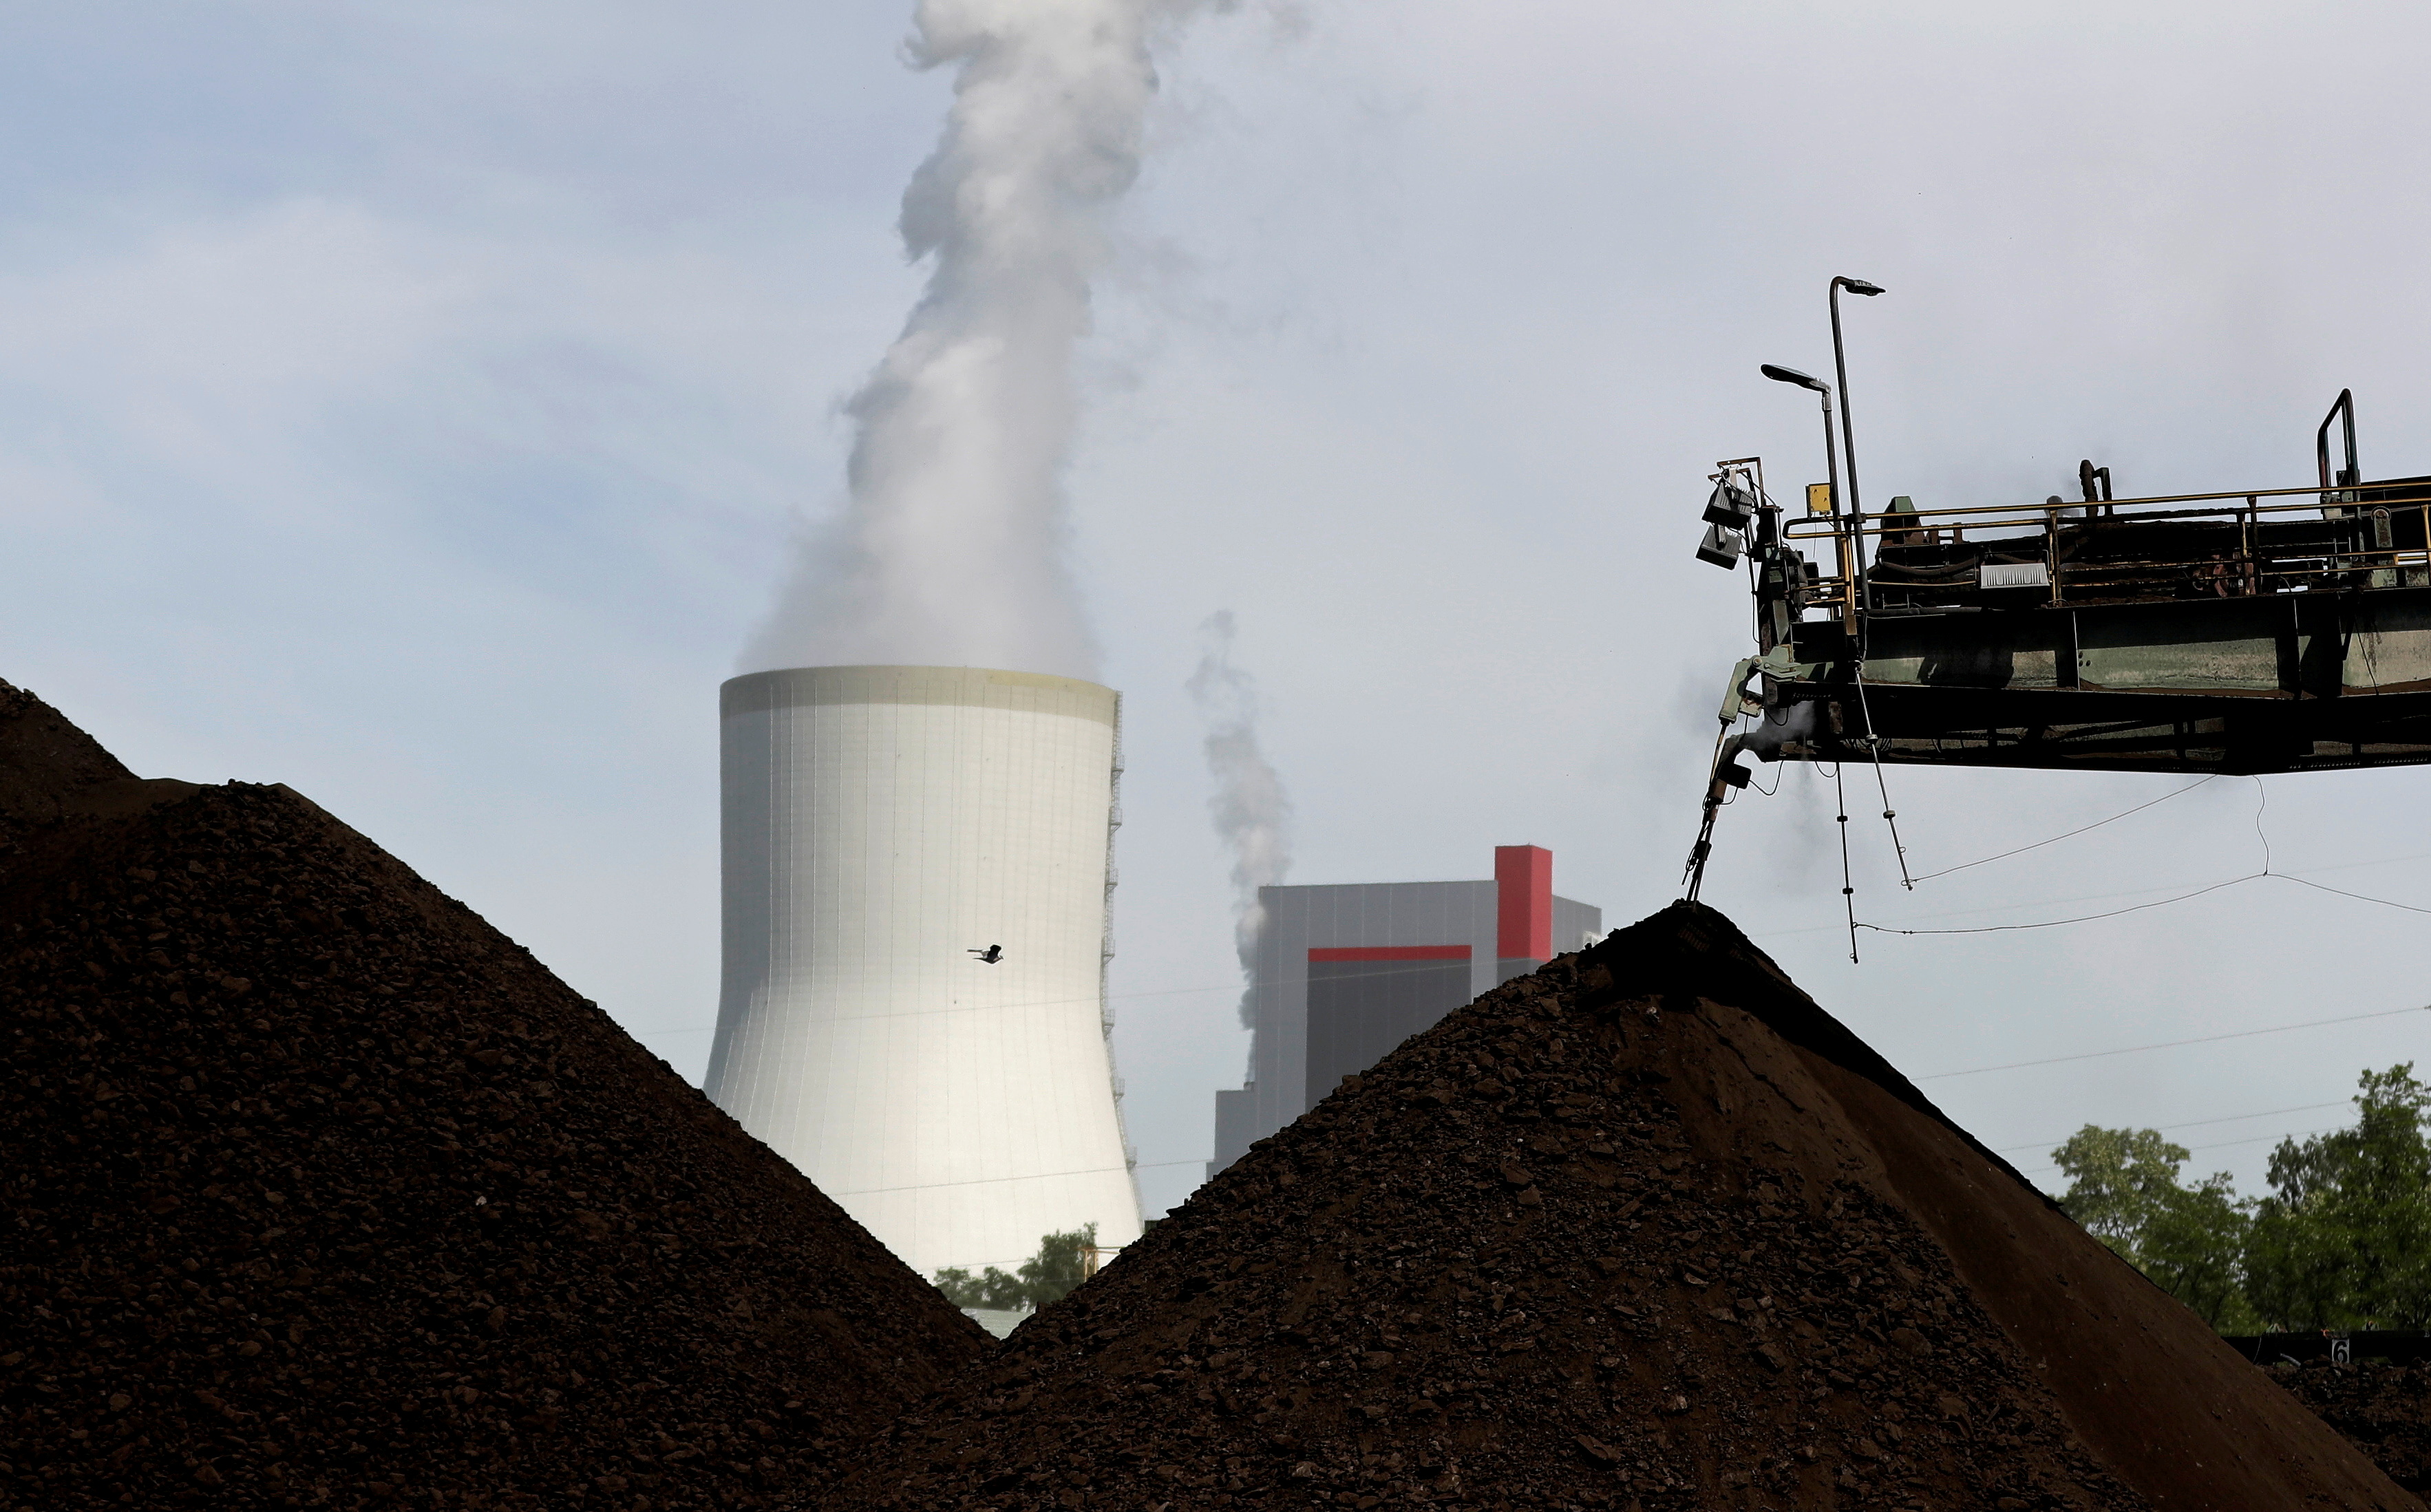 A cooling tower from the Turow coal-fired power plant is seen near the Turow open-pit coal mine in Bogatynia, Poland